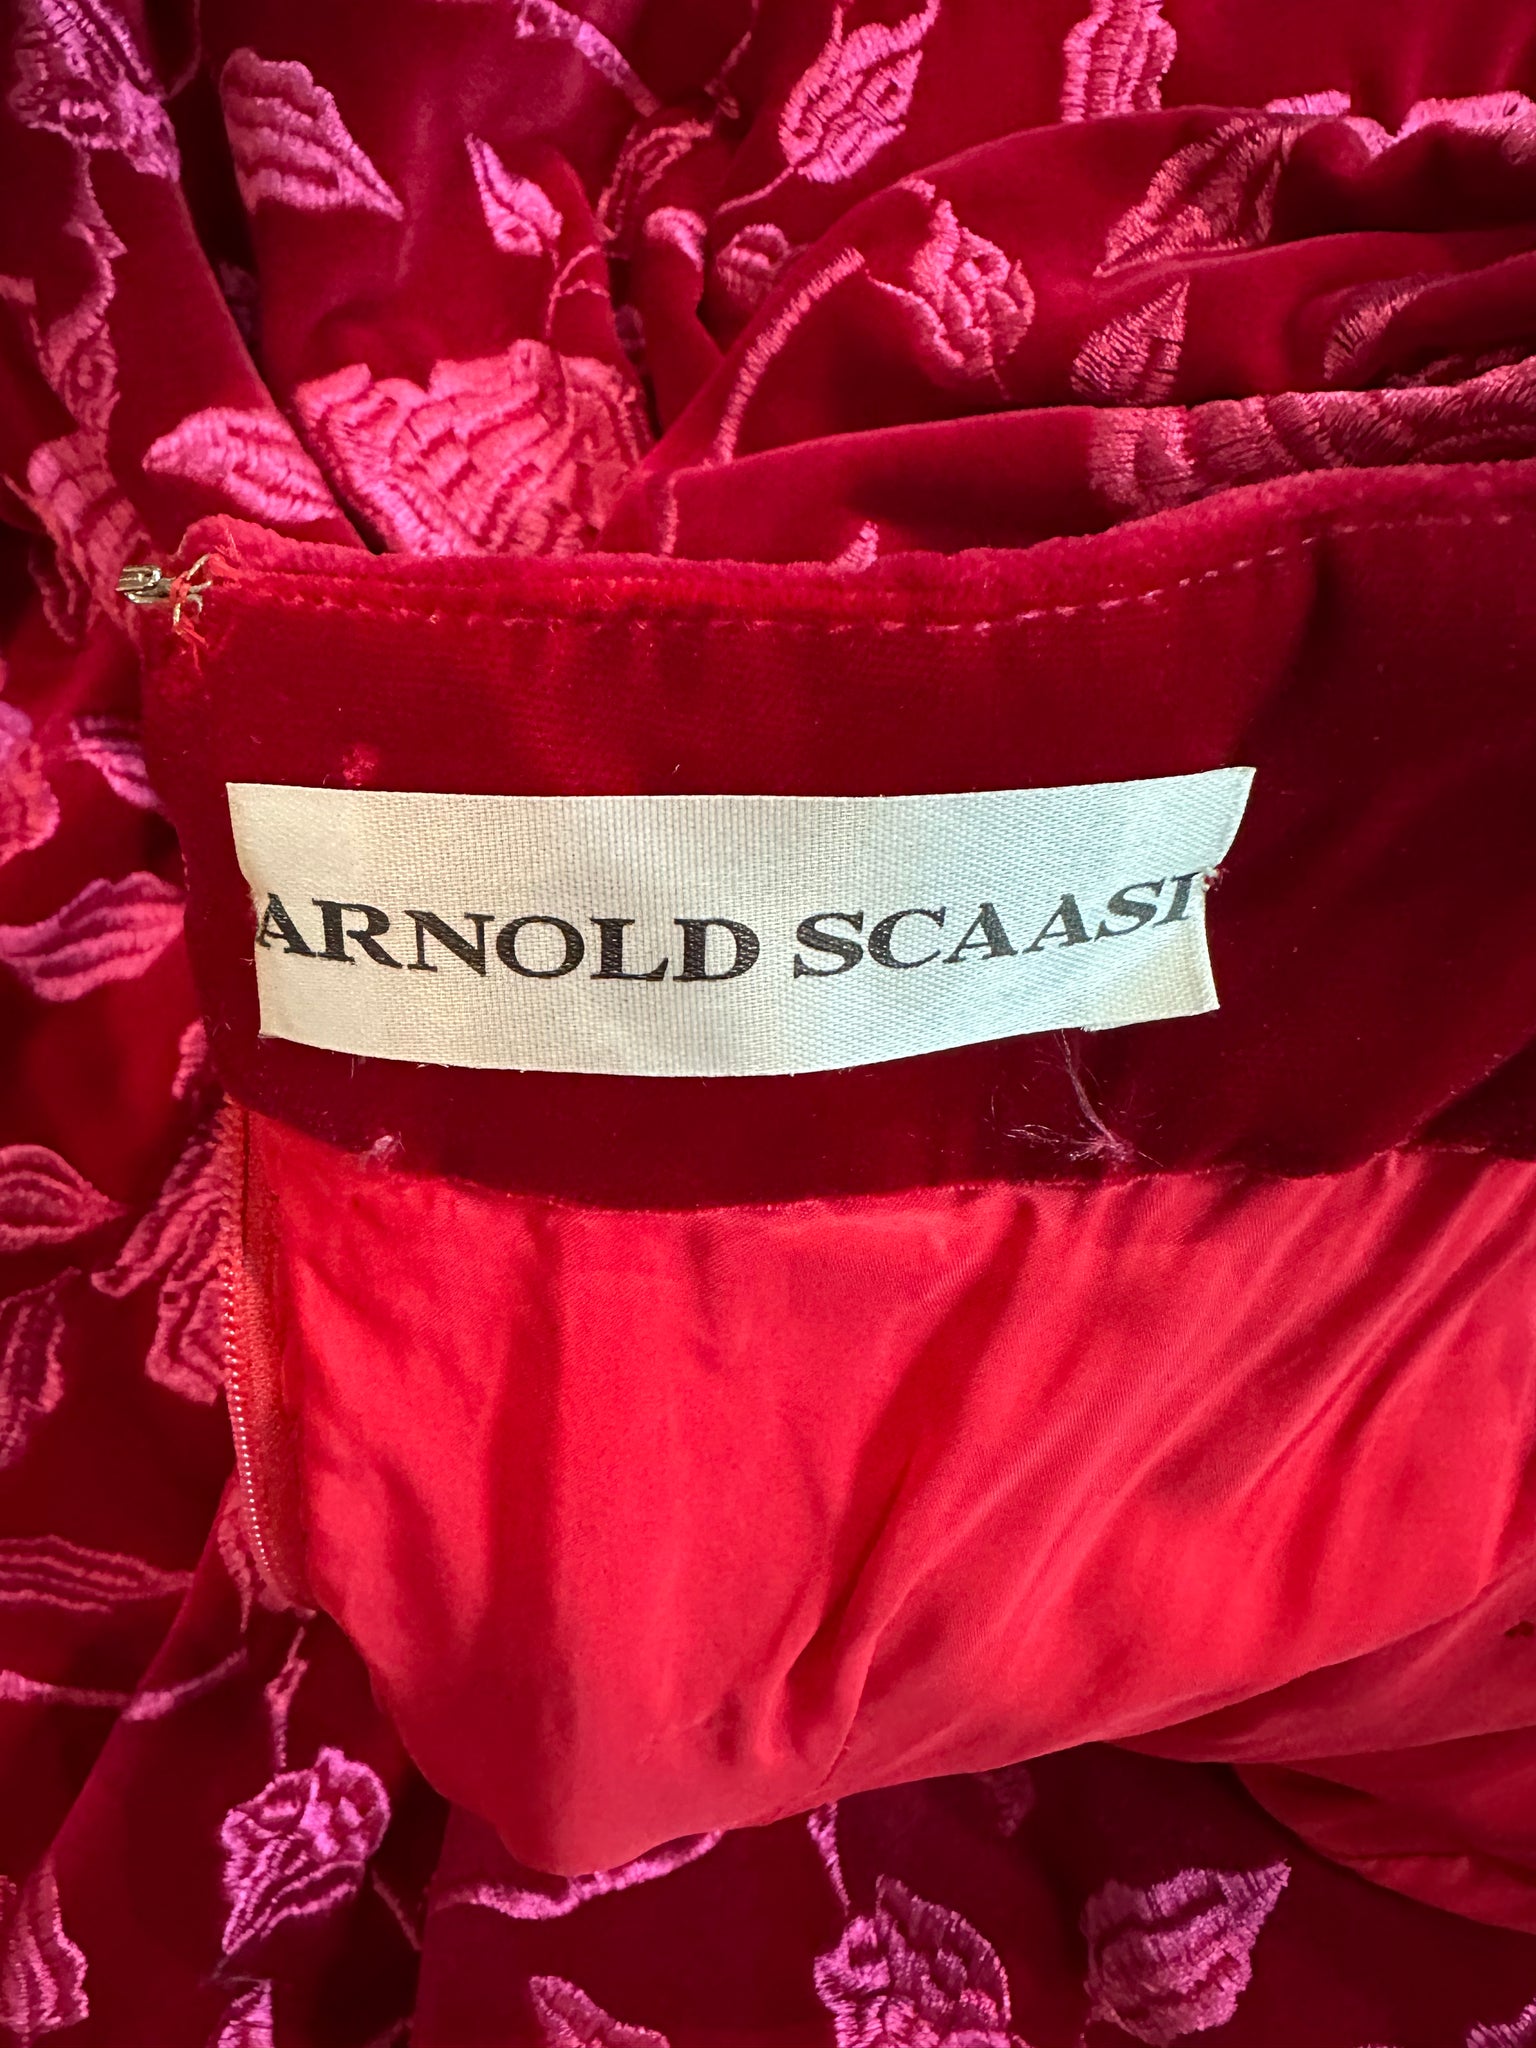 Arnold Scaasi 80s Red Velvet Gown with Pink Embroidery LABEL 6 of 6